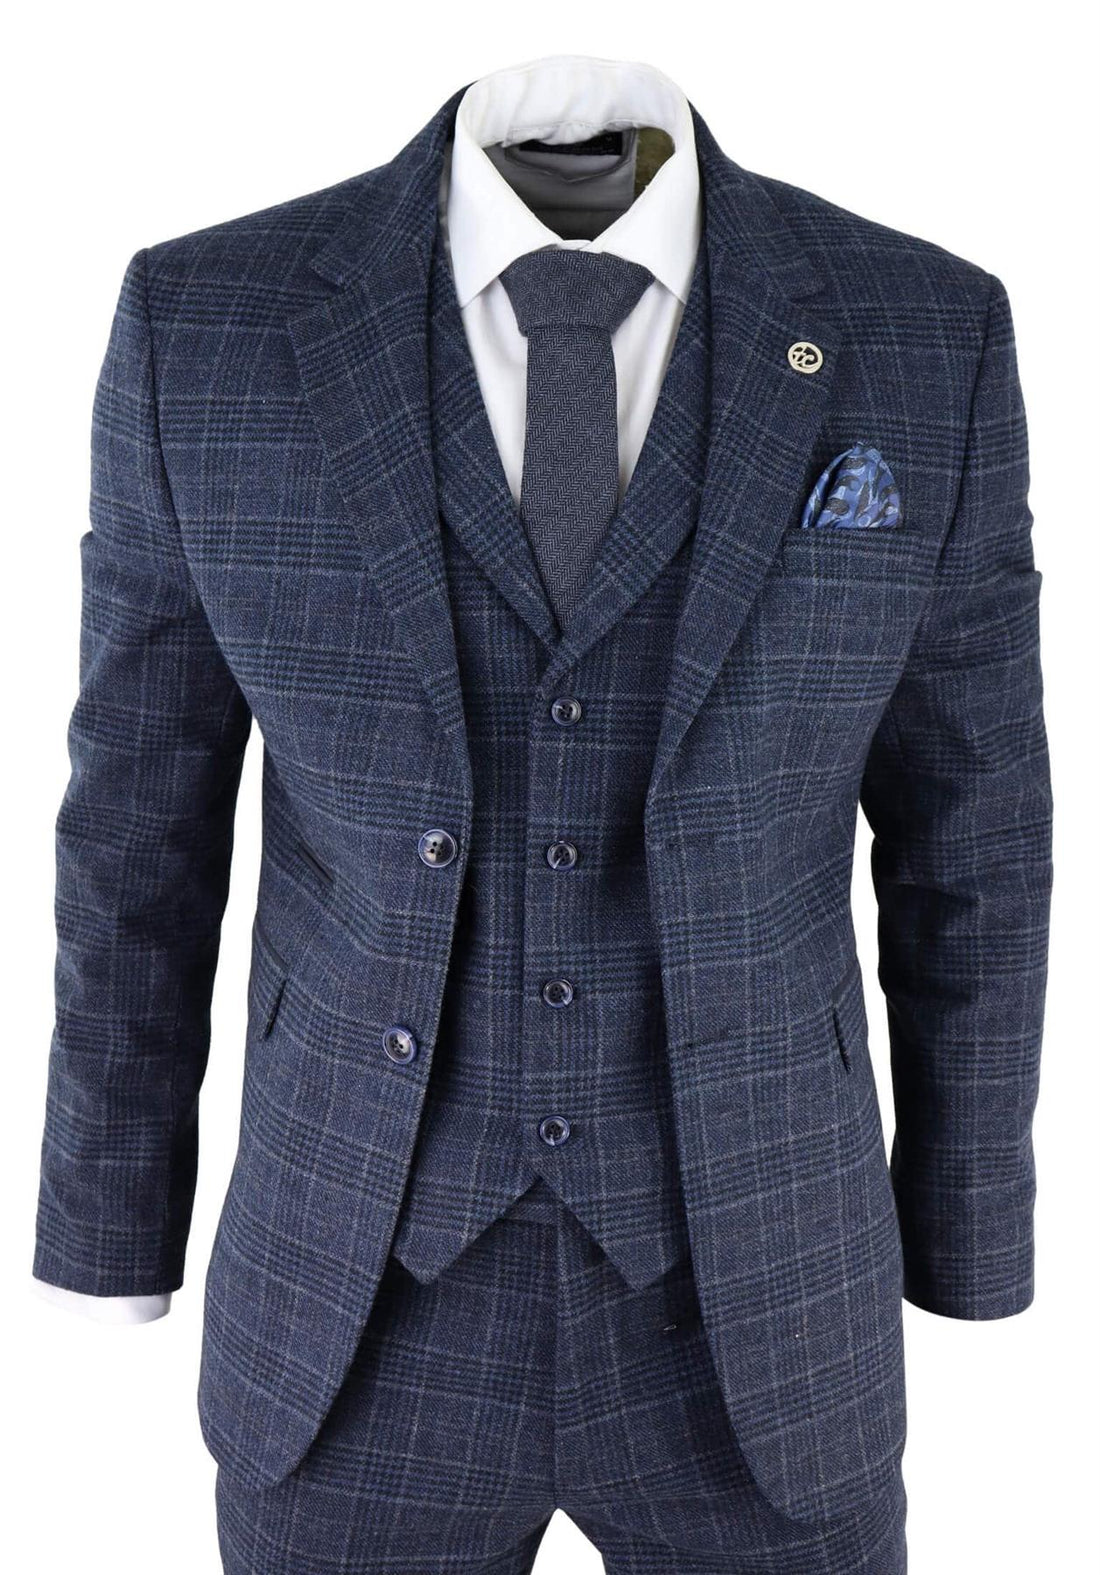 Mens Blue Check 3 Piece Tweed Suit Peaky Blinders 1920s Gatsby Tailored Fit - Upperclass Fashions 